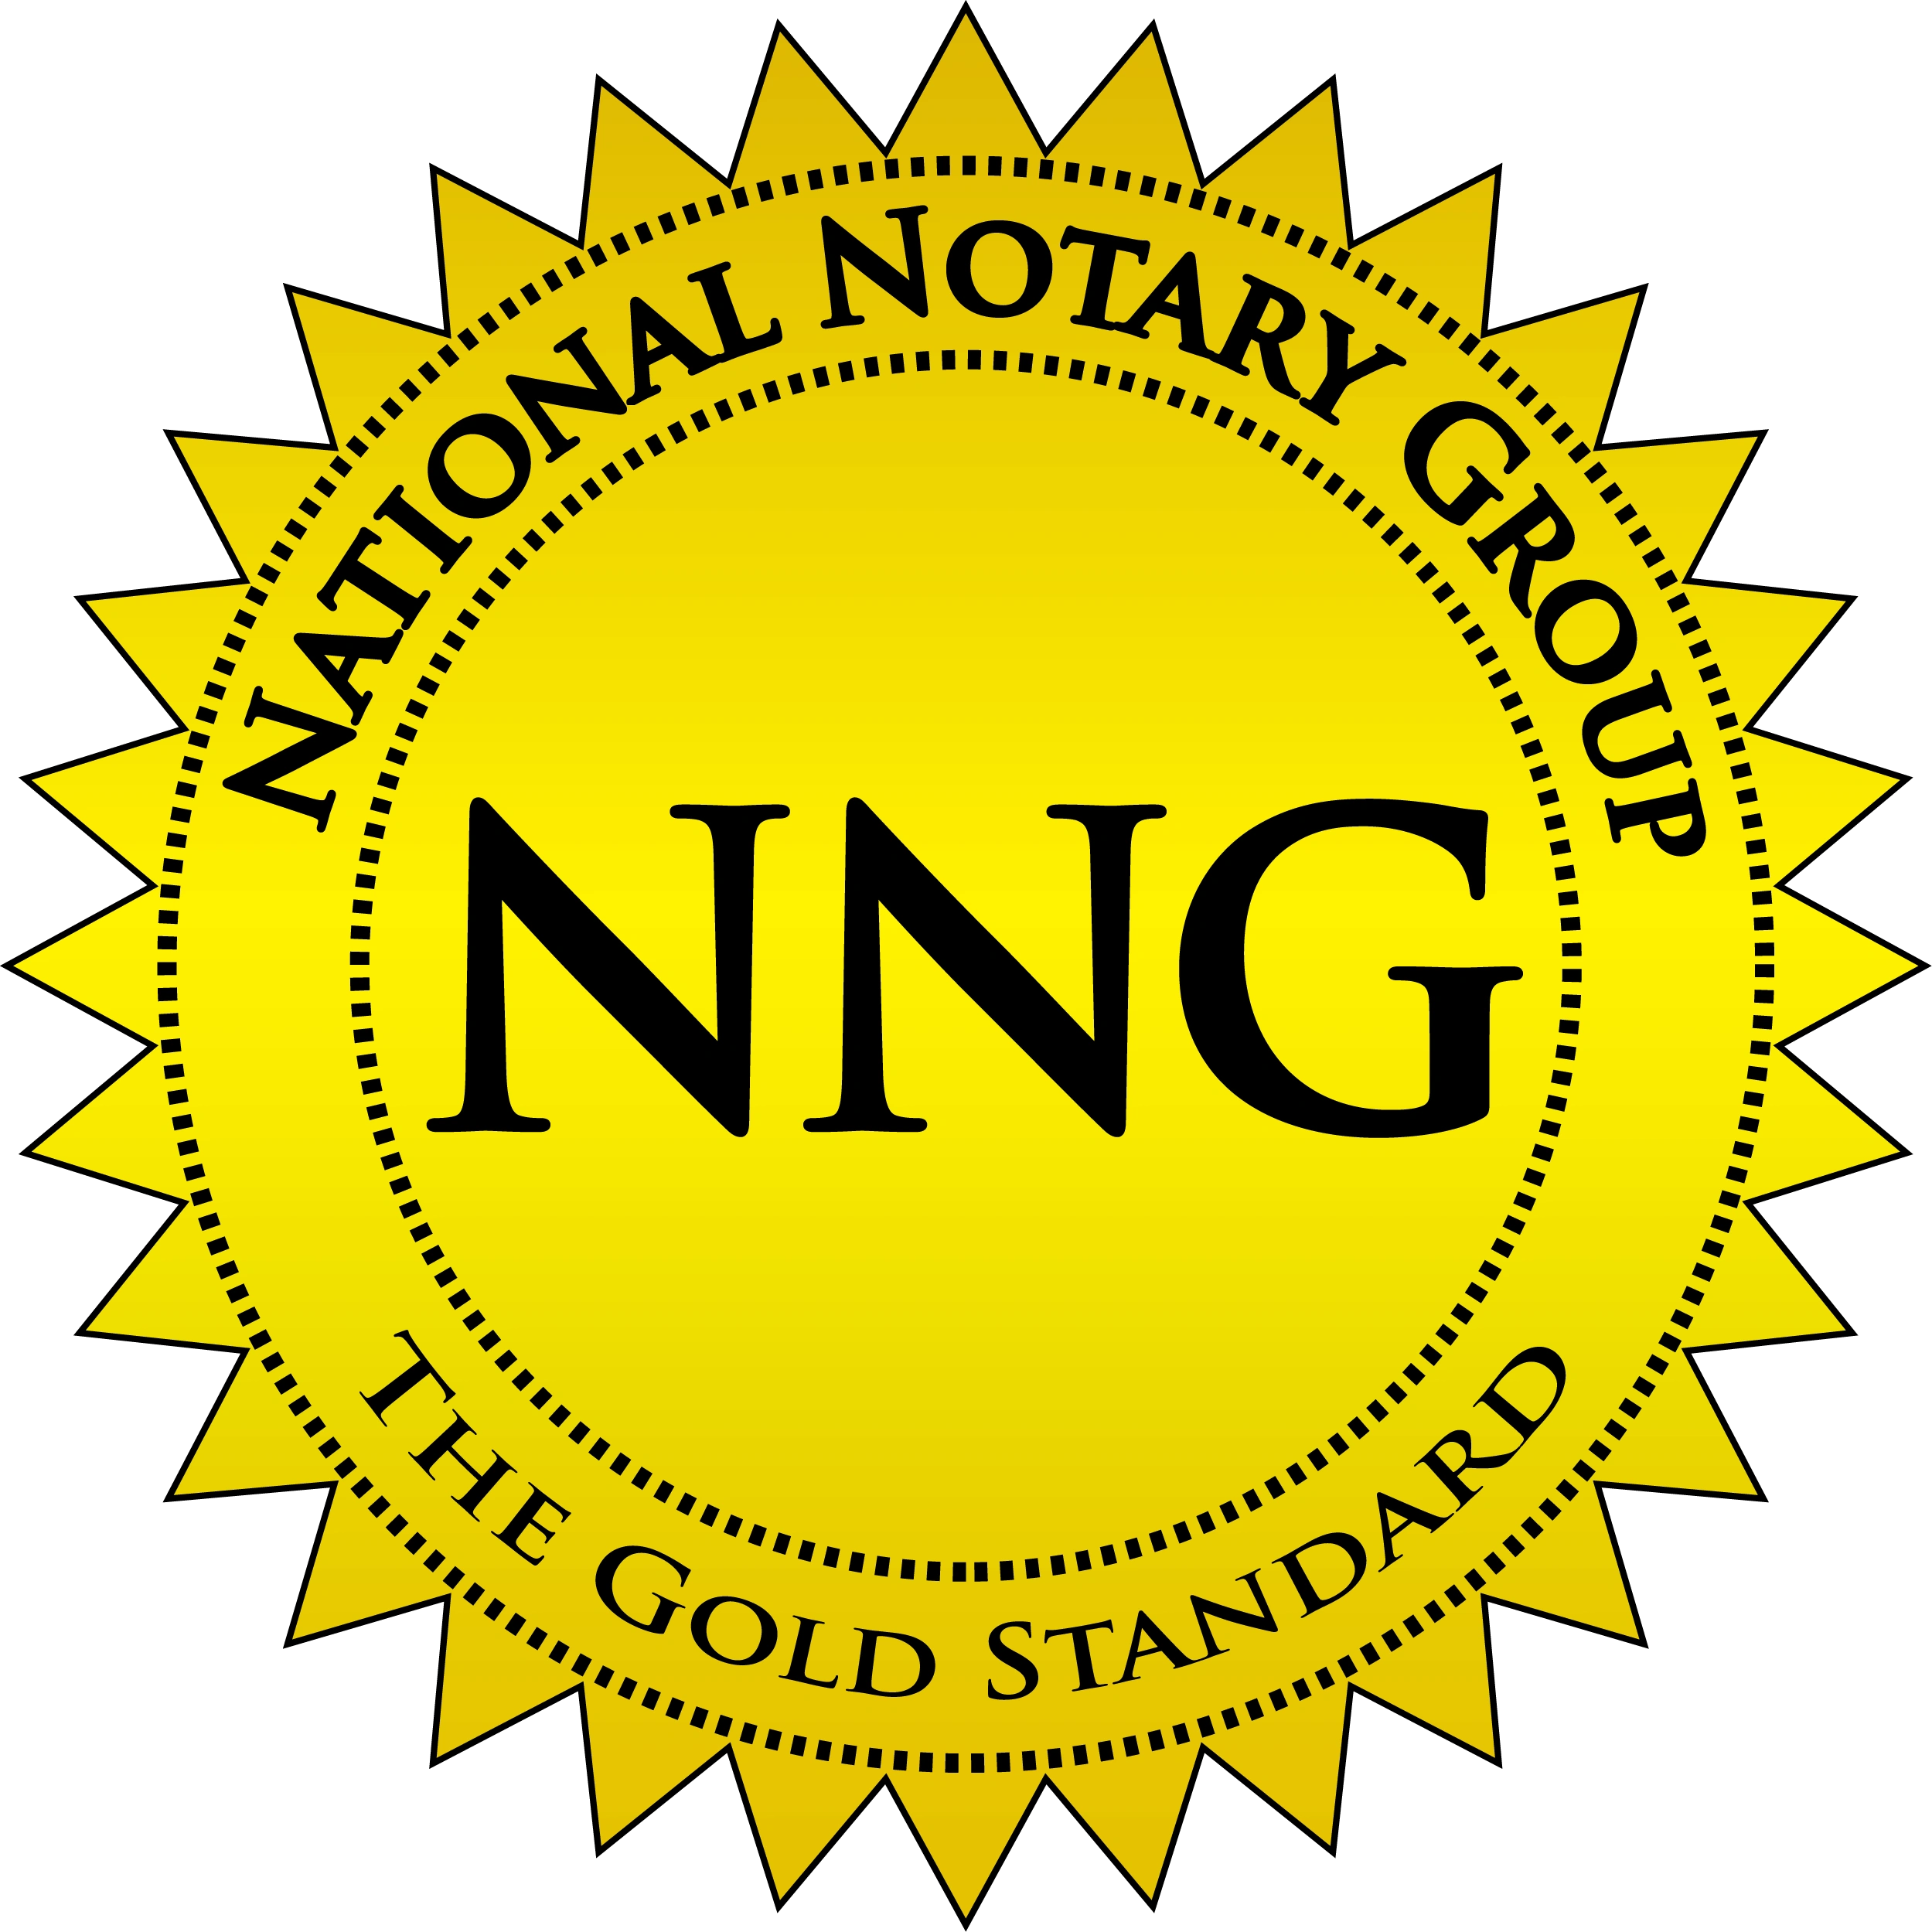 National Notary Group